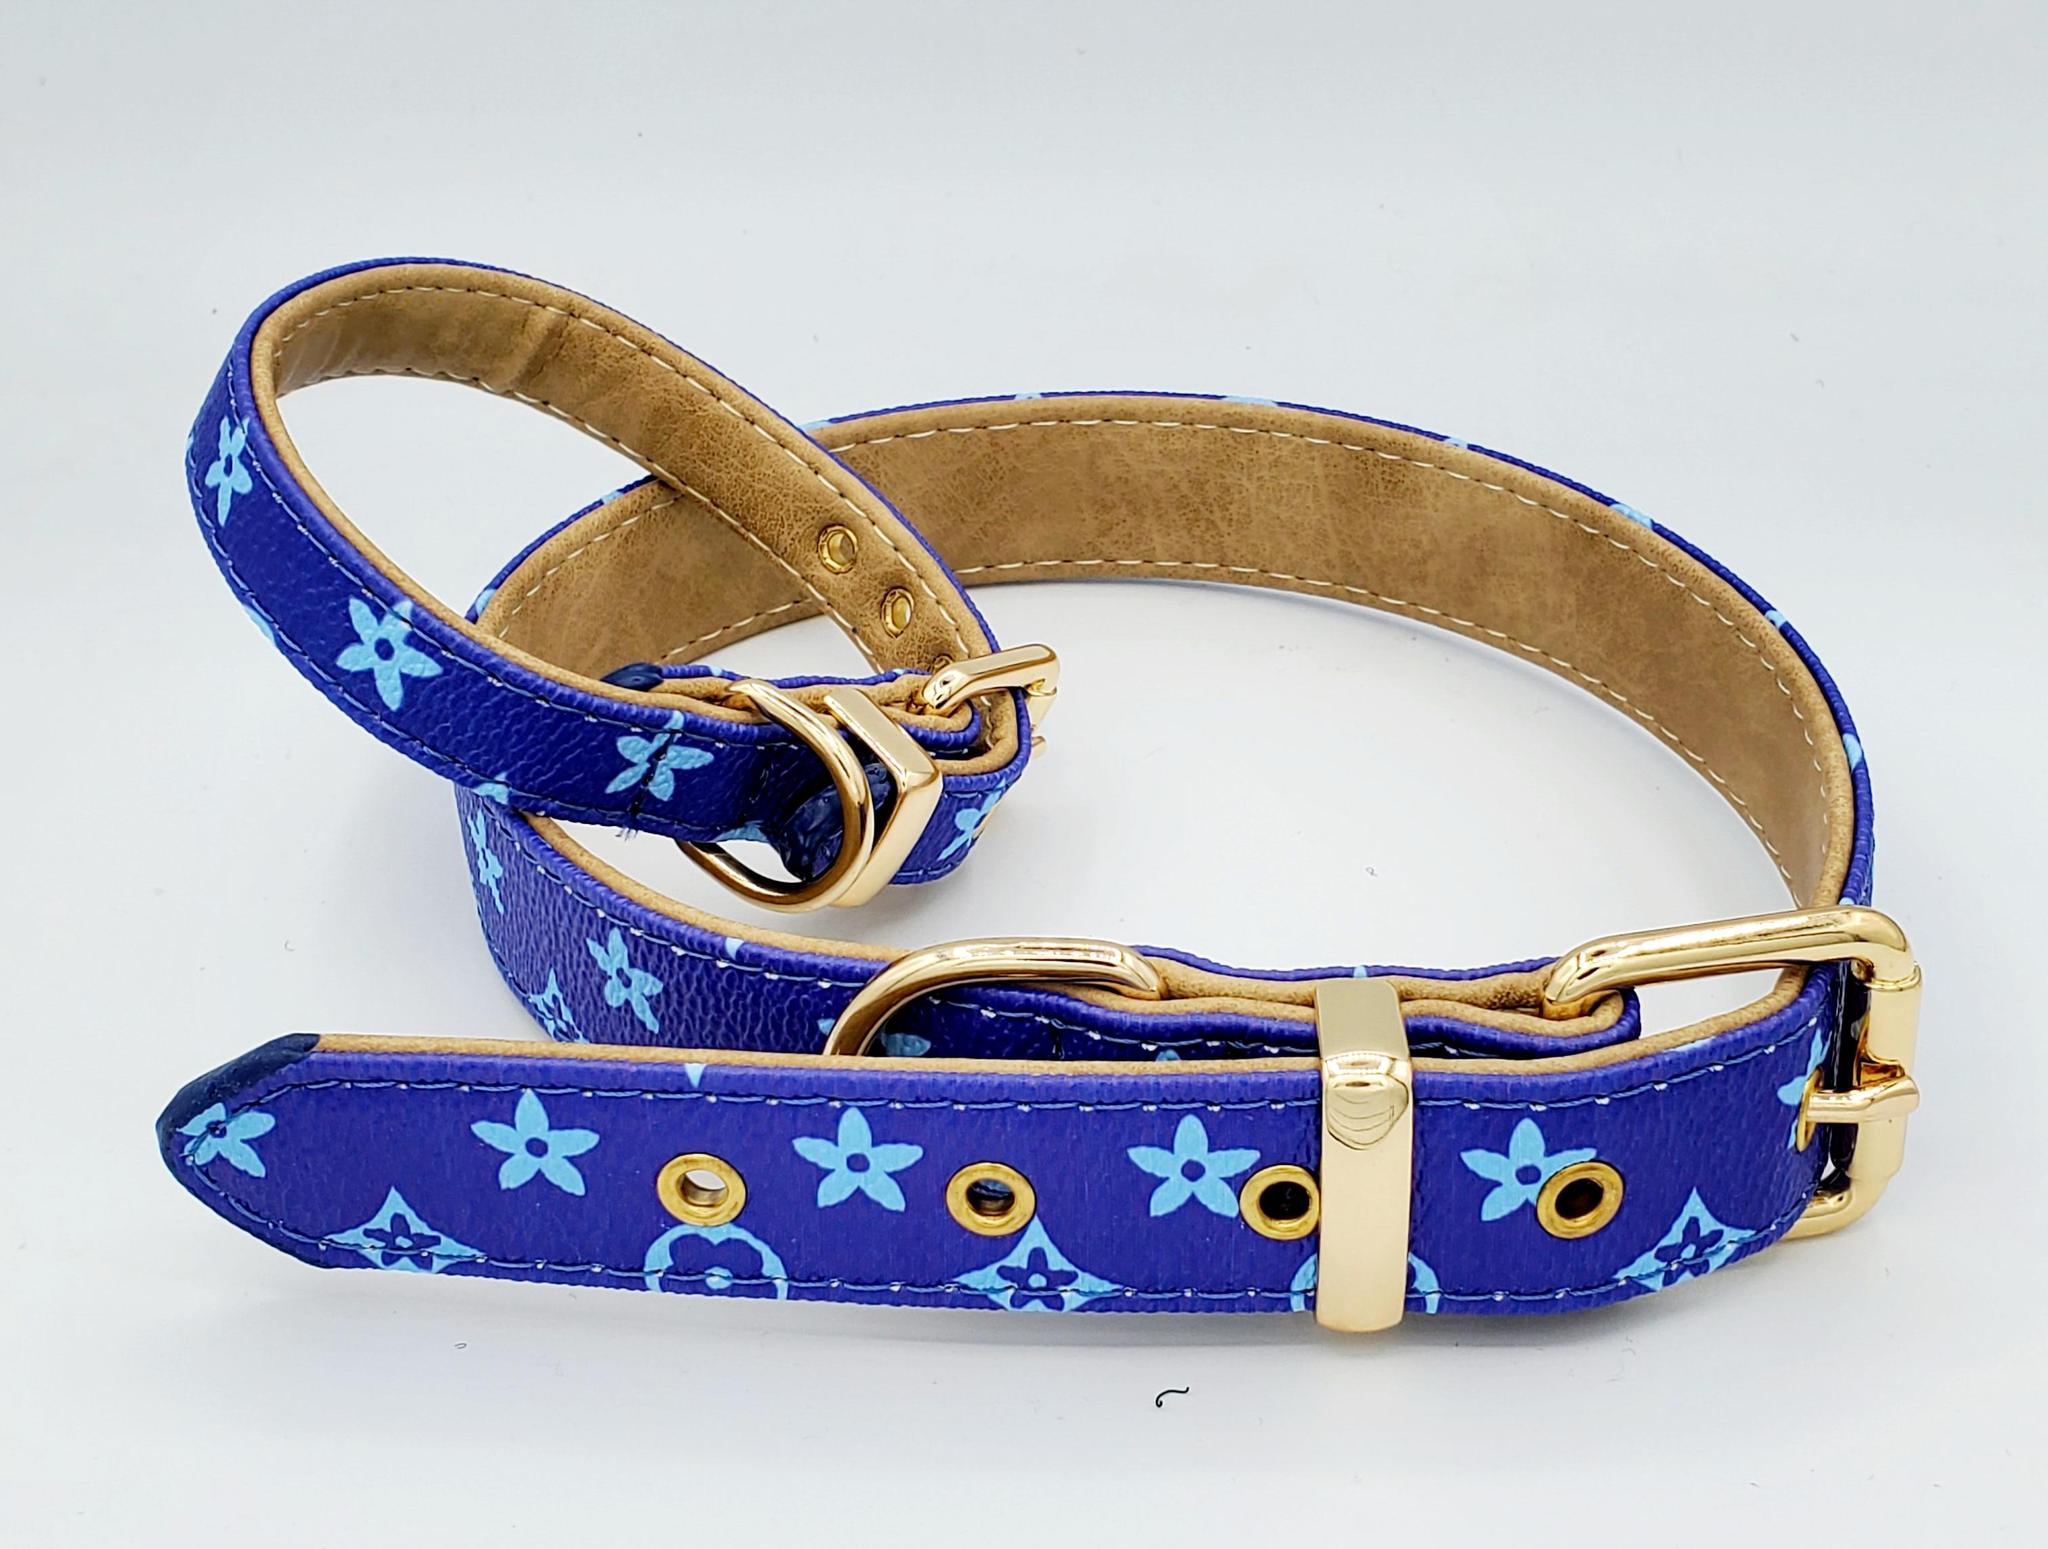 chewy vuitton dog harness